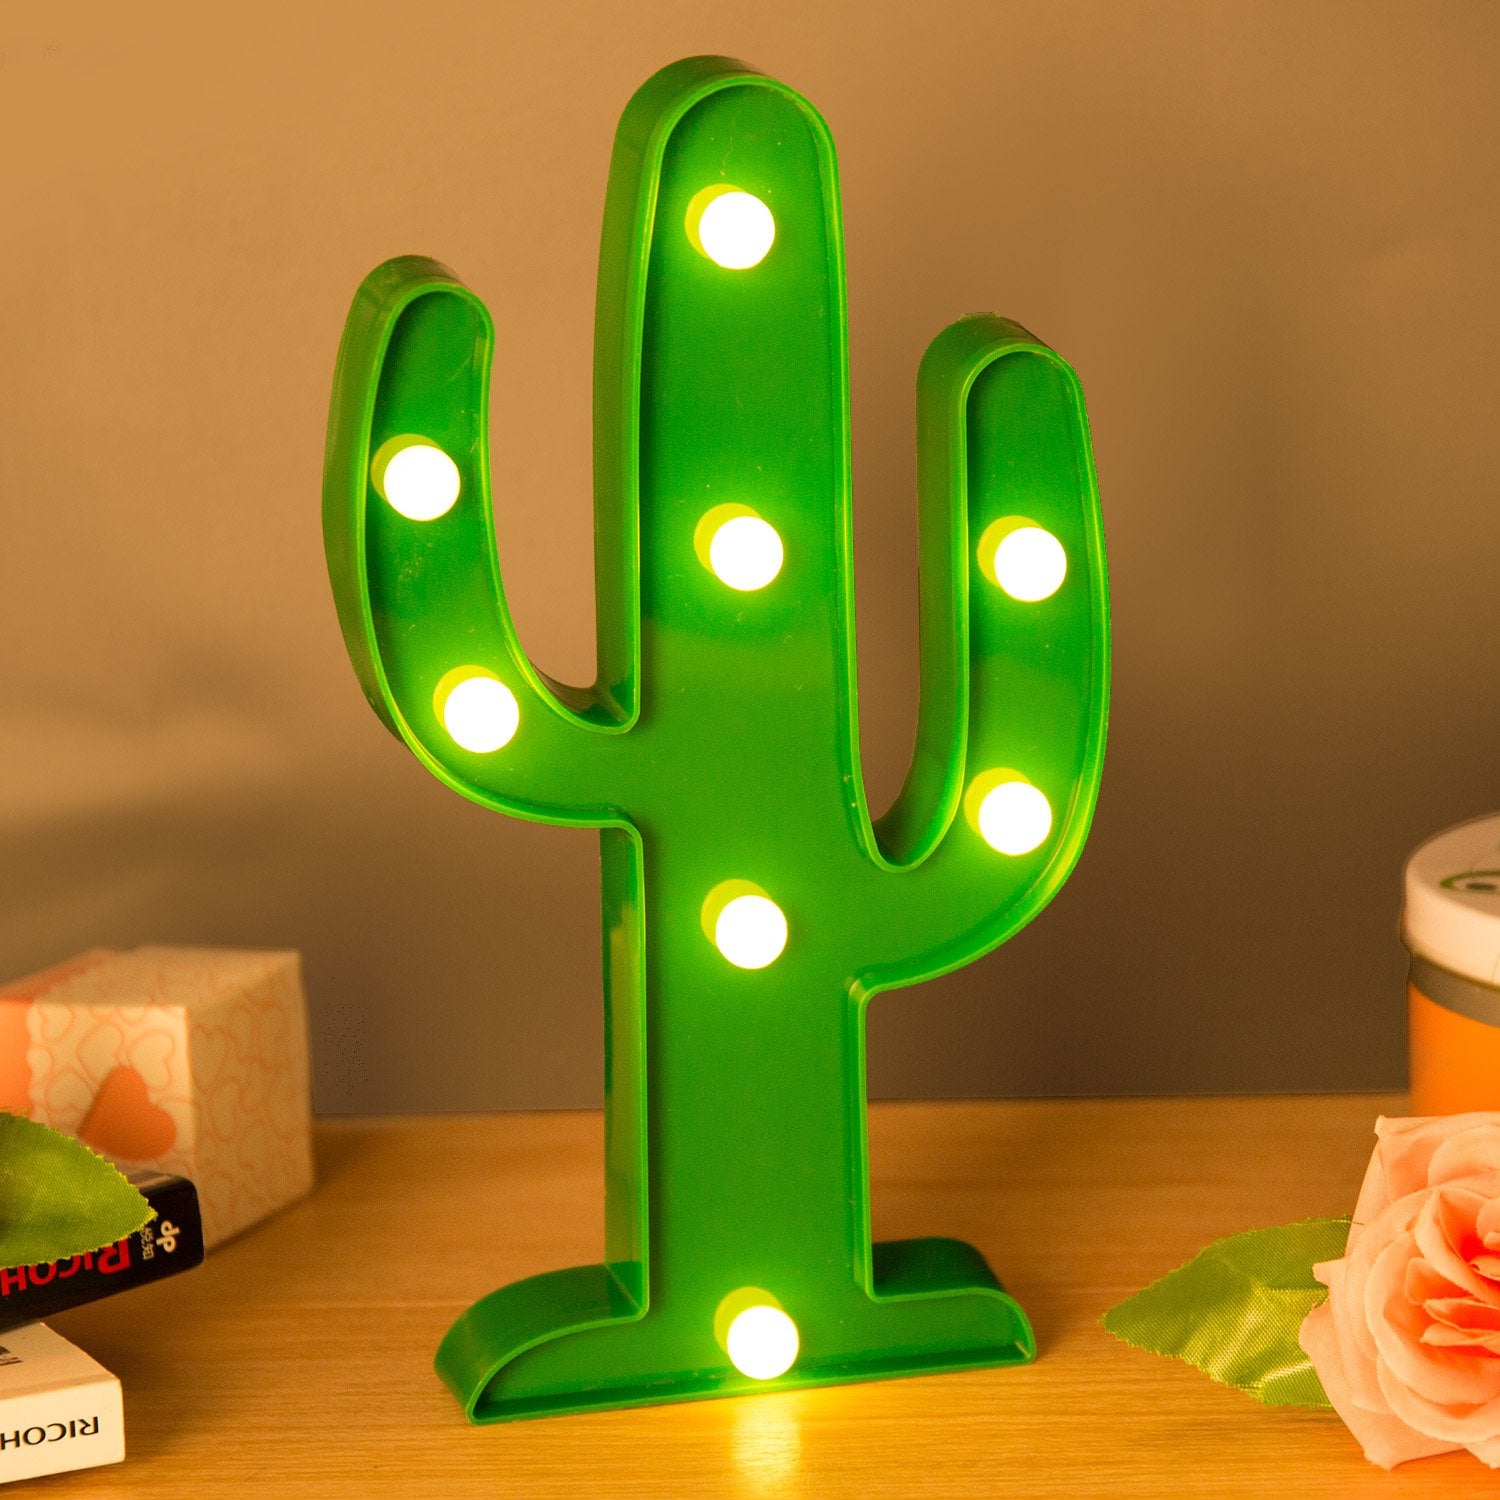 3D LED Flamingo Lamp Pineapple Cactus Light Romantic Night Lamp Table Lamp Marquee LED Nightlight For Home Decoration